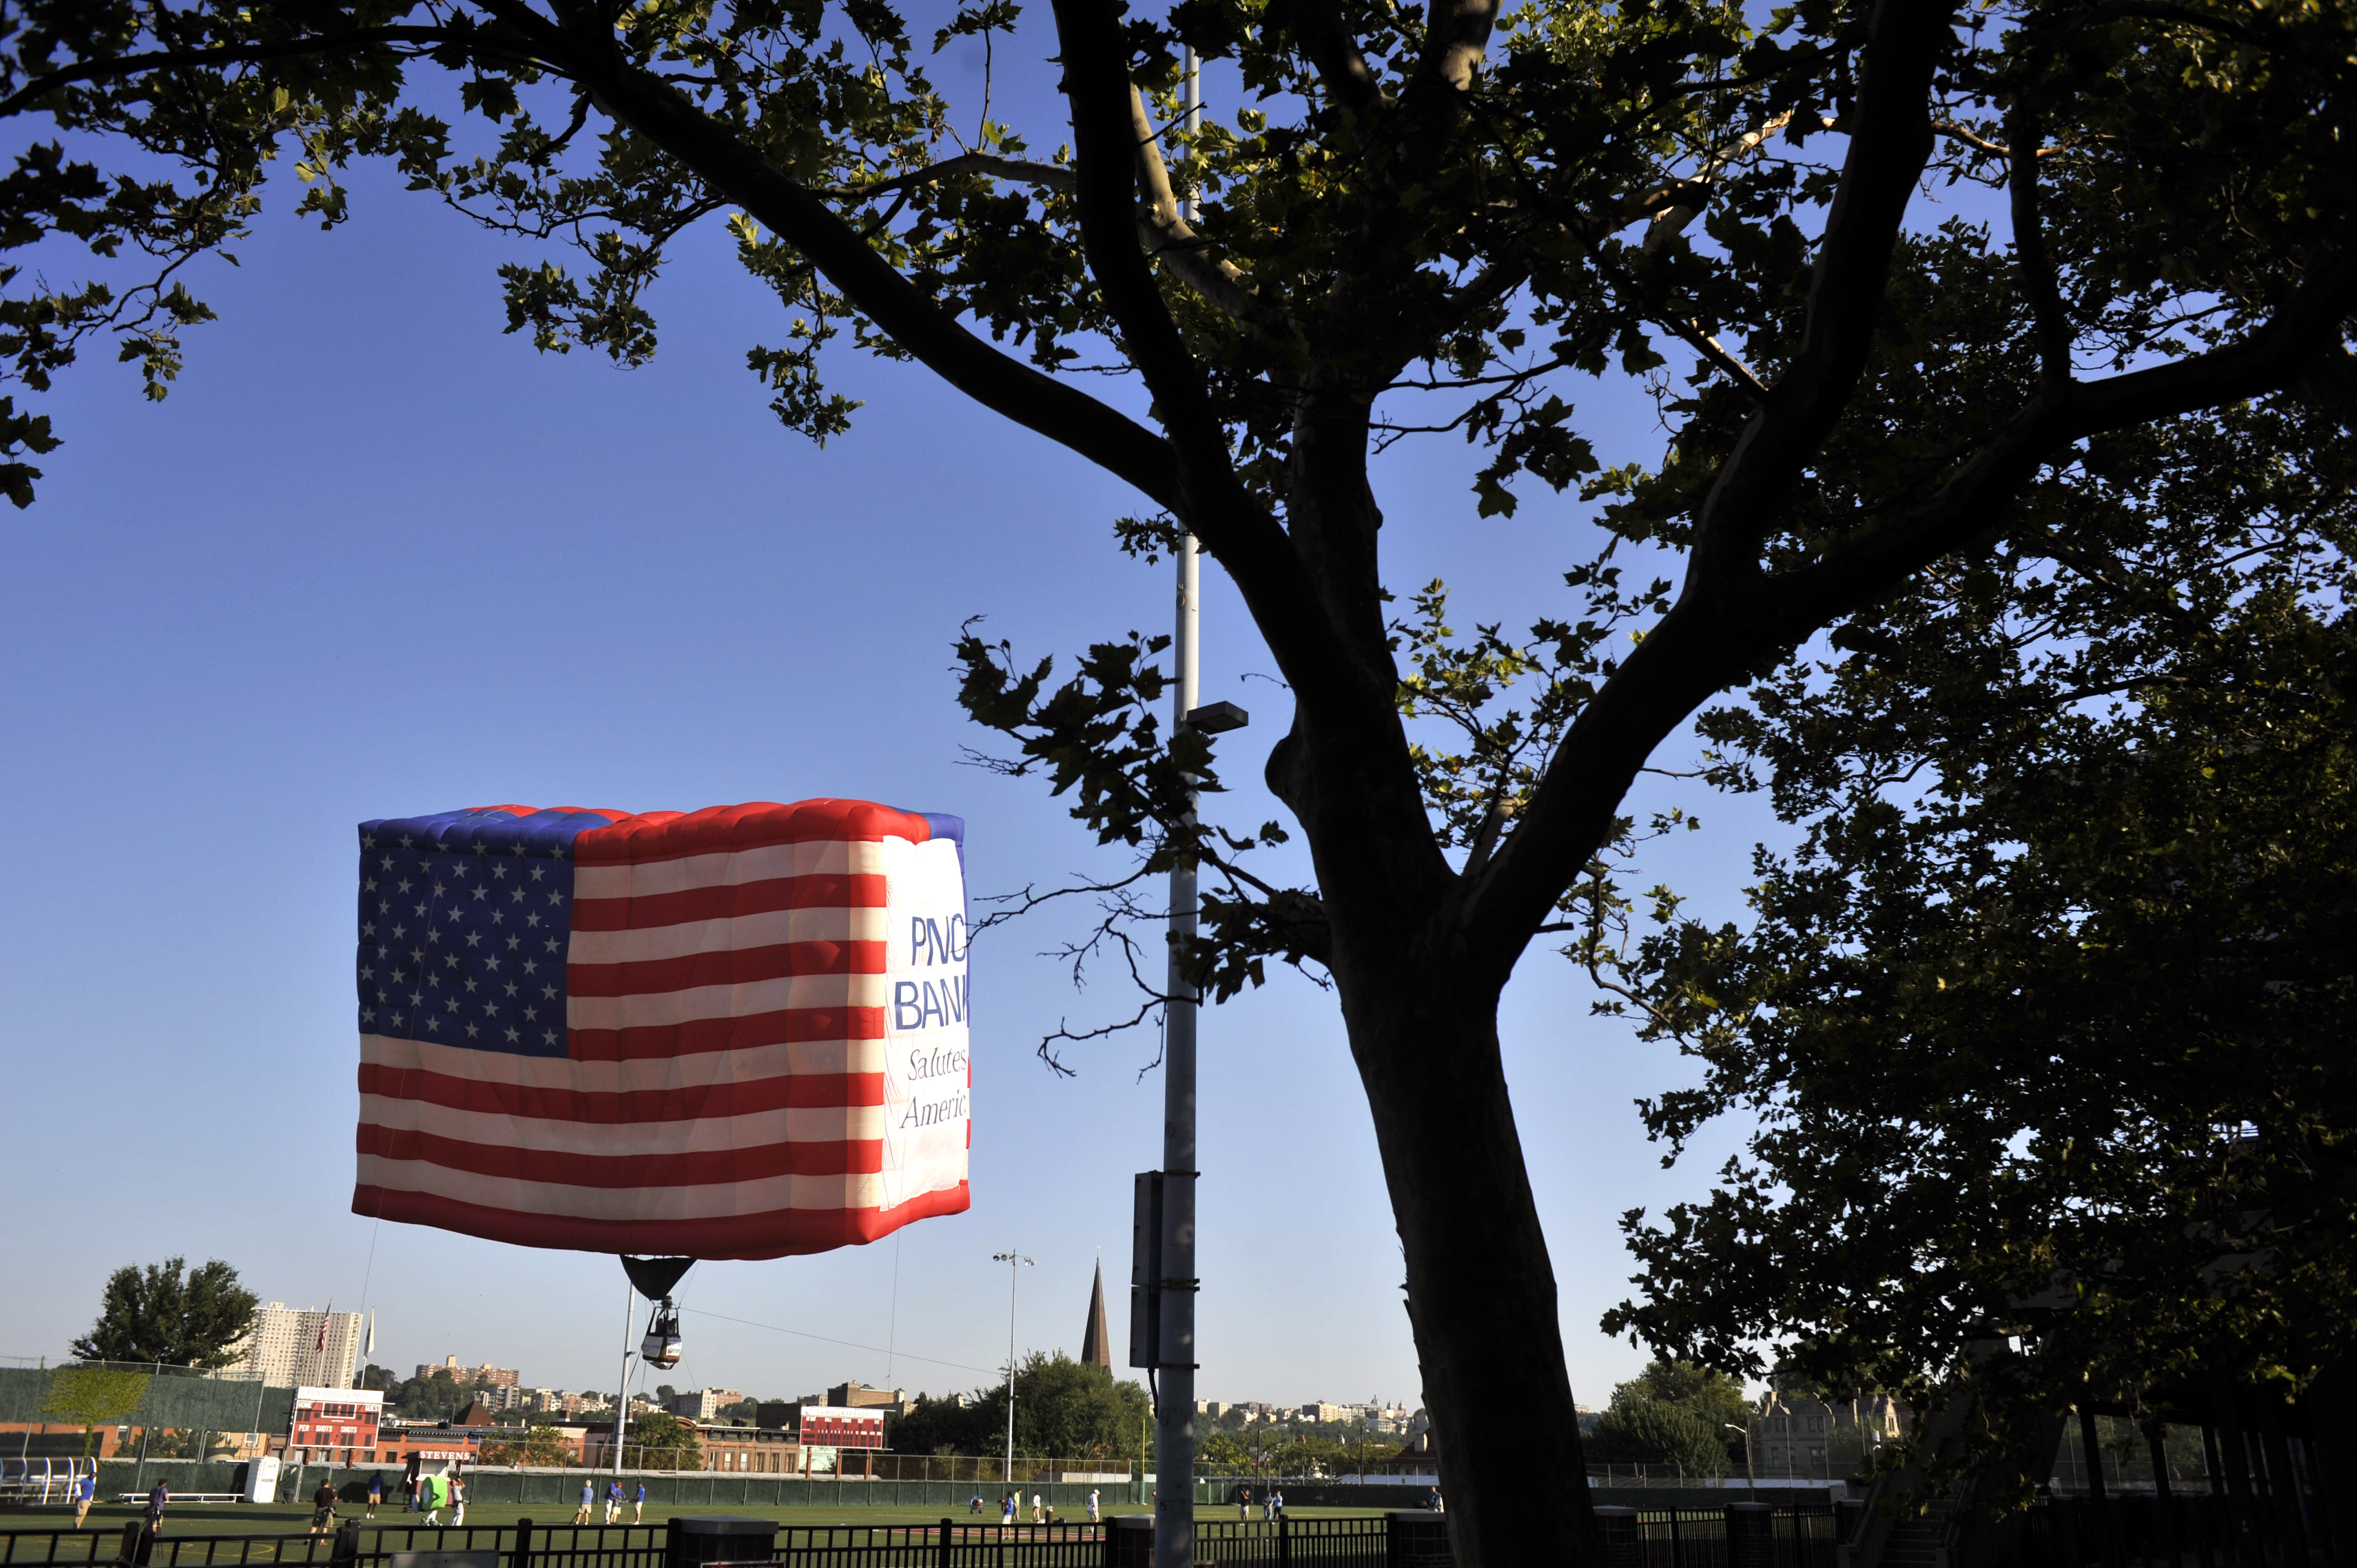 world-s-largest-free-flying-flag-balloon-honors-america-and-female